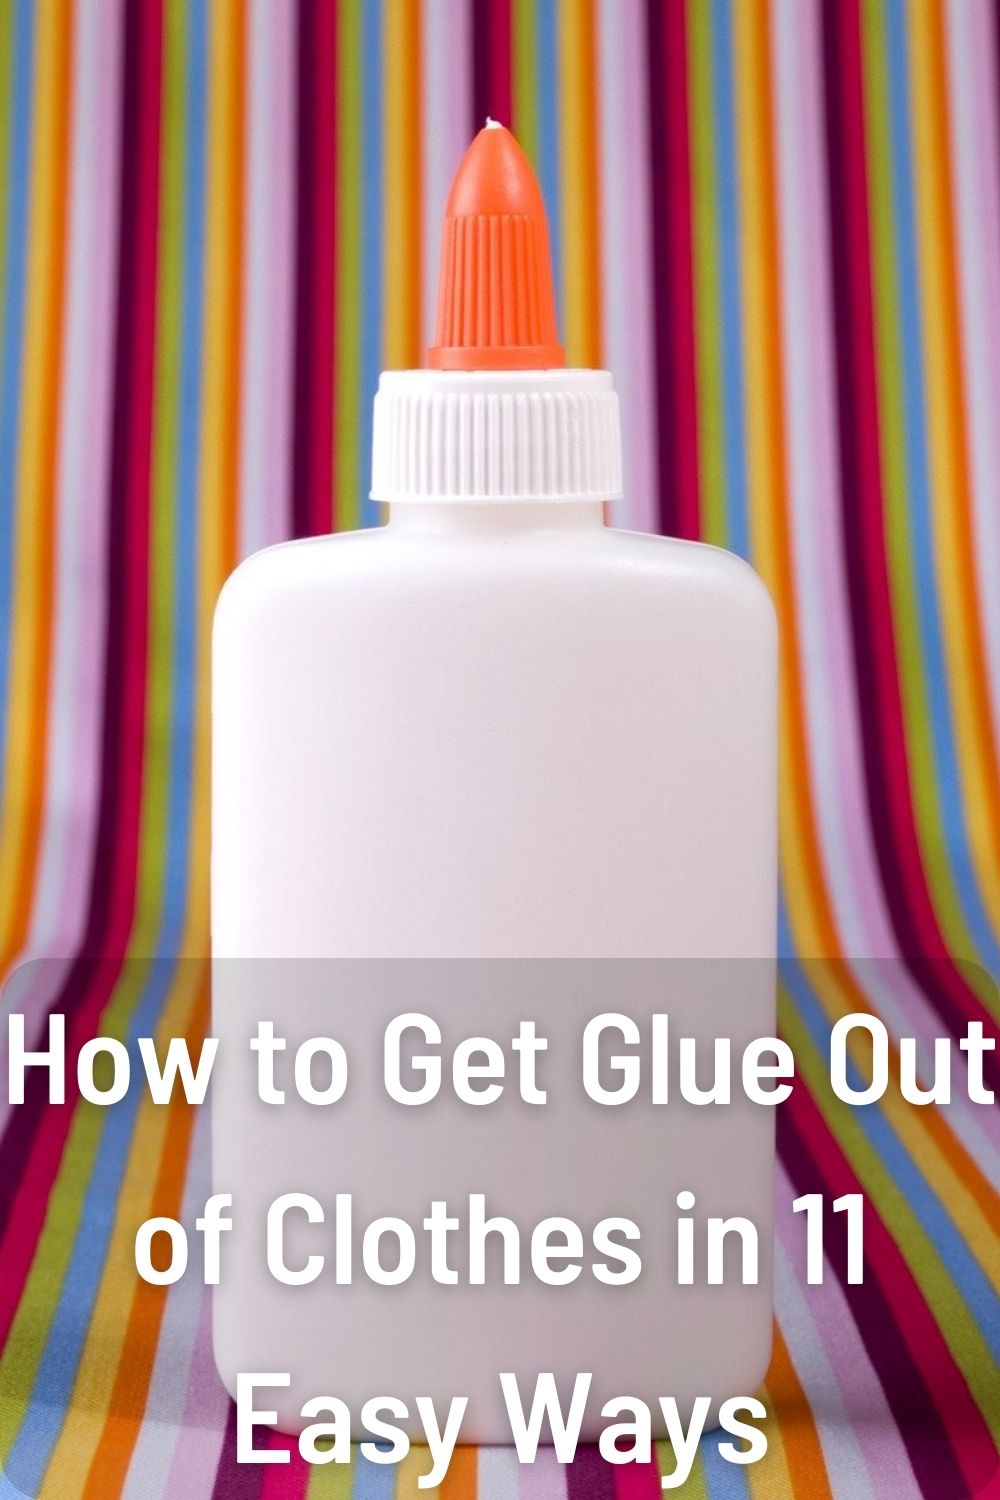 How to Get Glue Out of Clothes in 11 Easy Ways